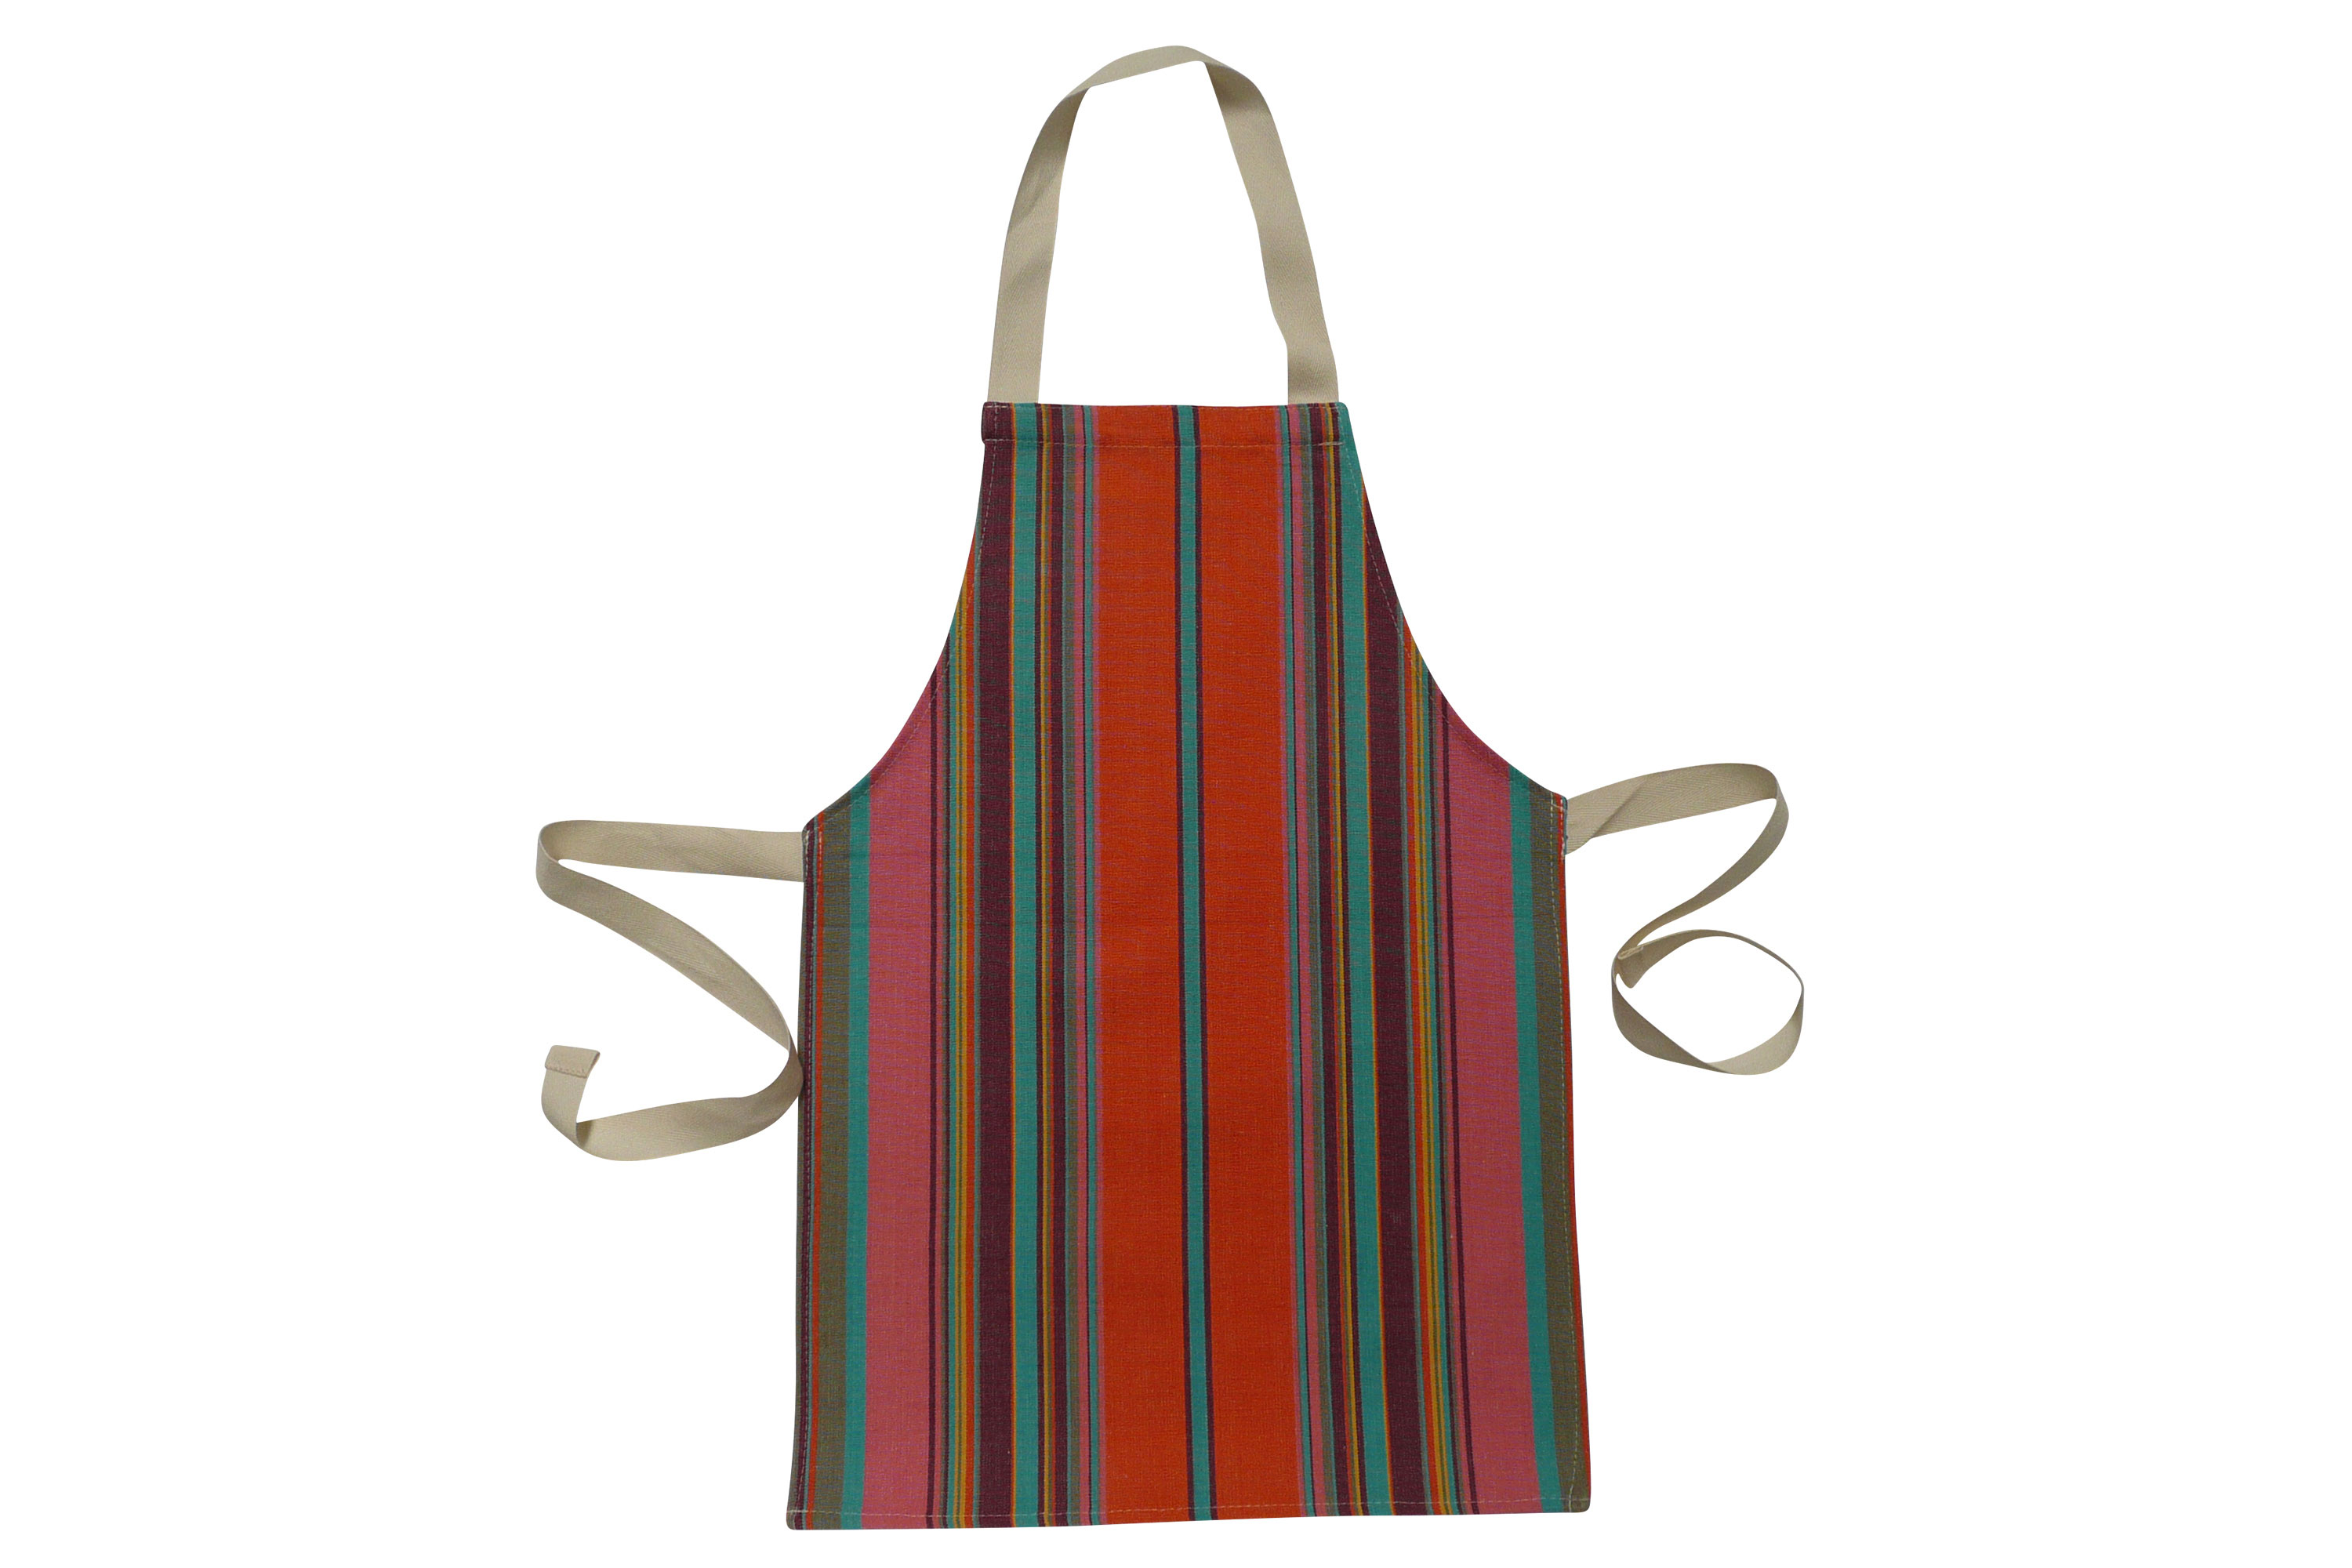 Toddlers Aprons - Striped Aprons For Small Childrencoral, bright green, terracotta   